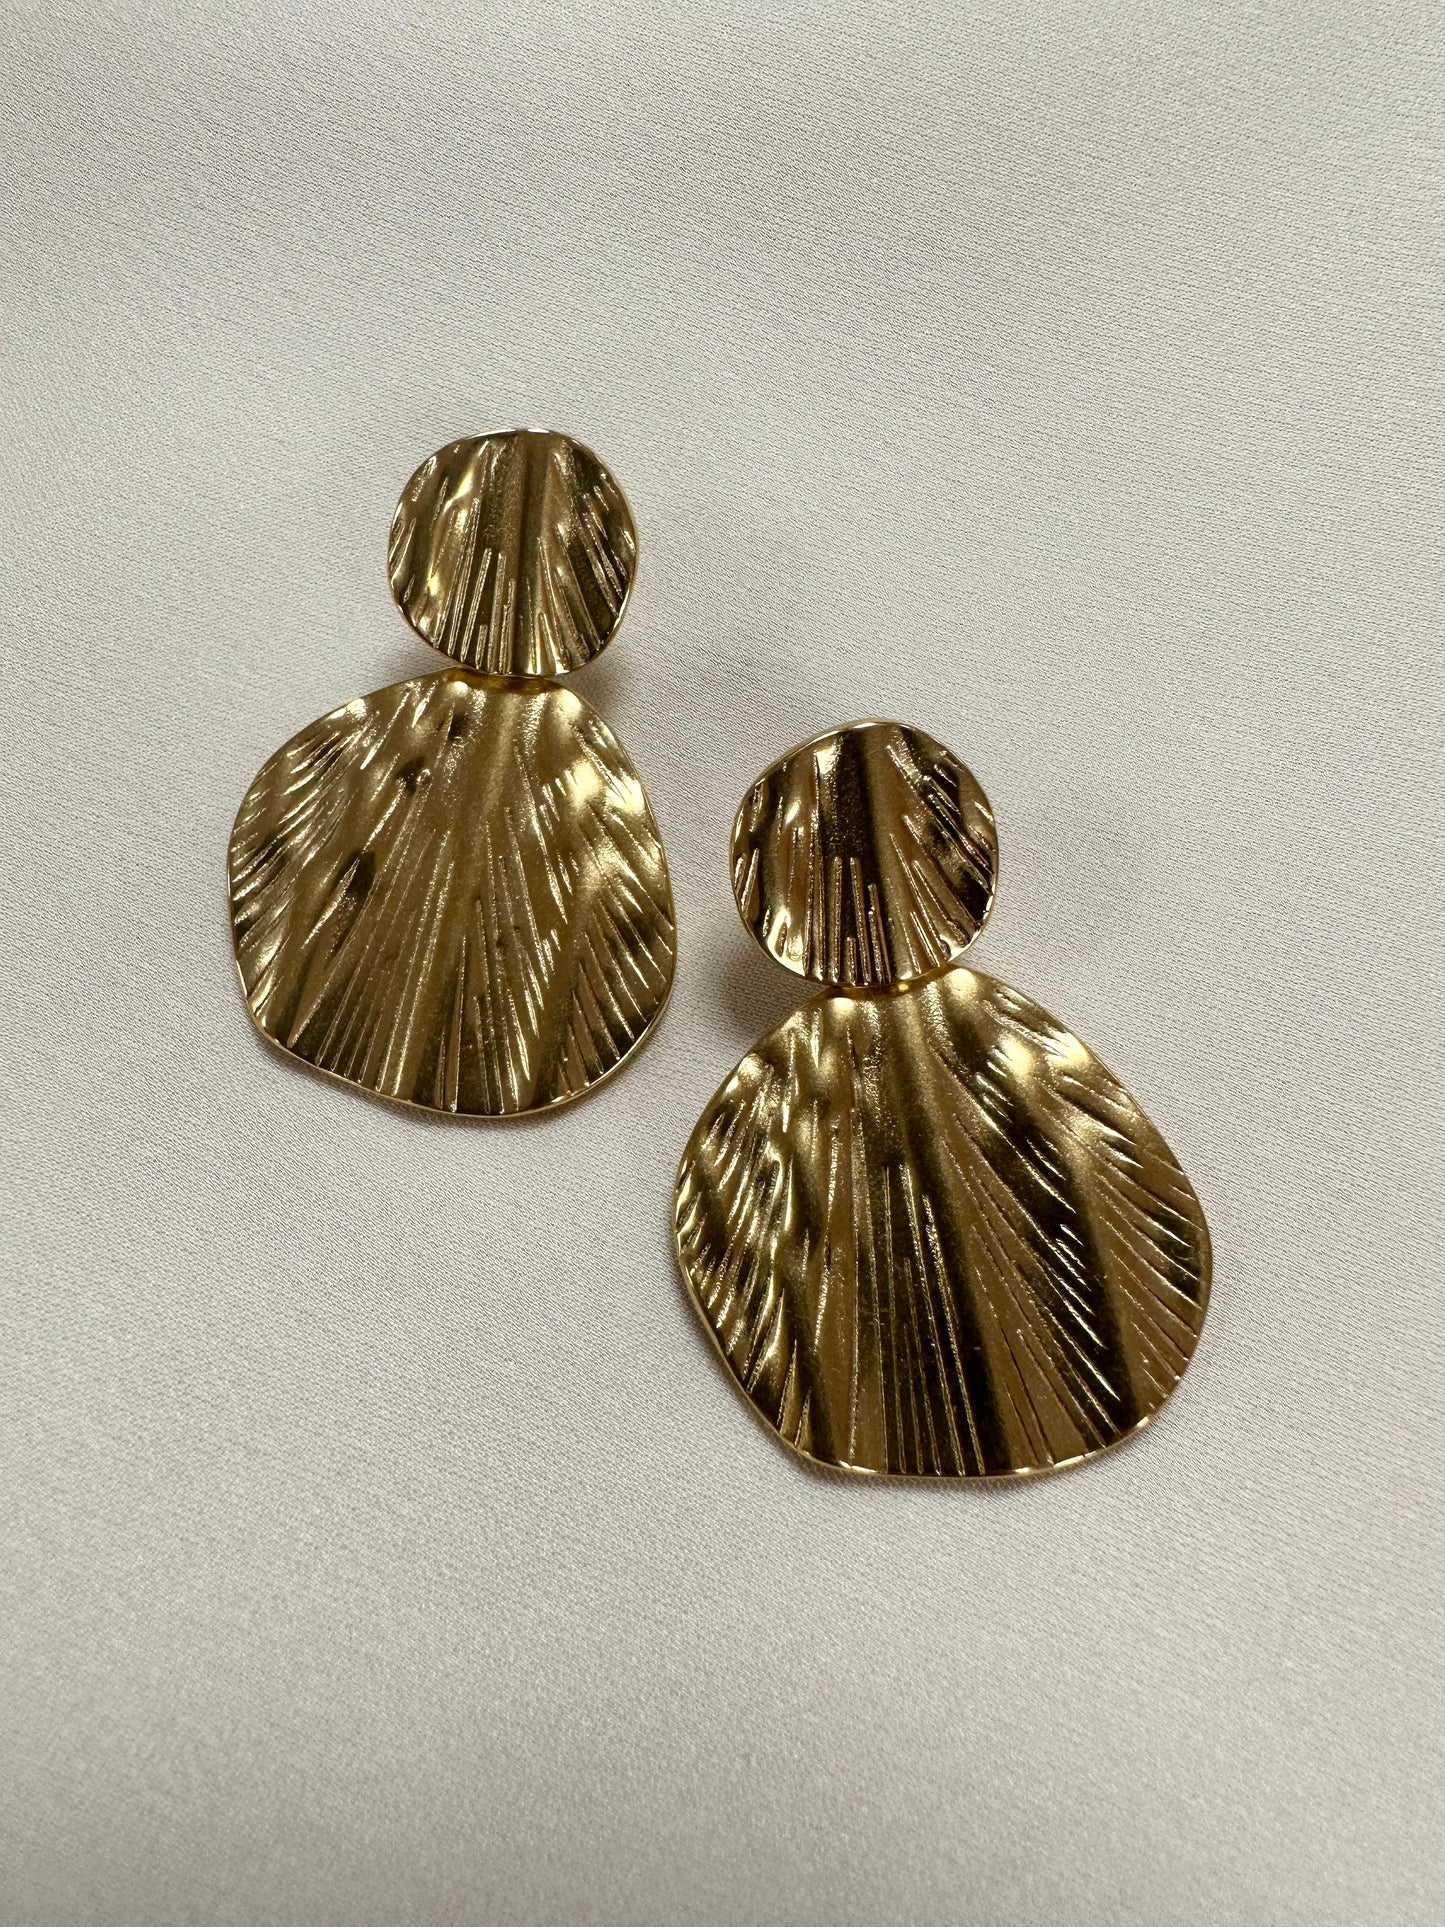 Gold textured earrings